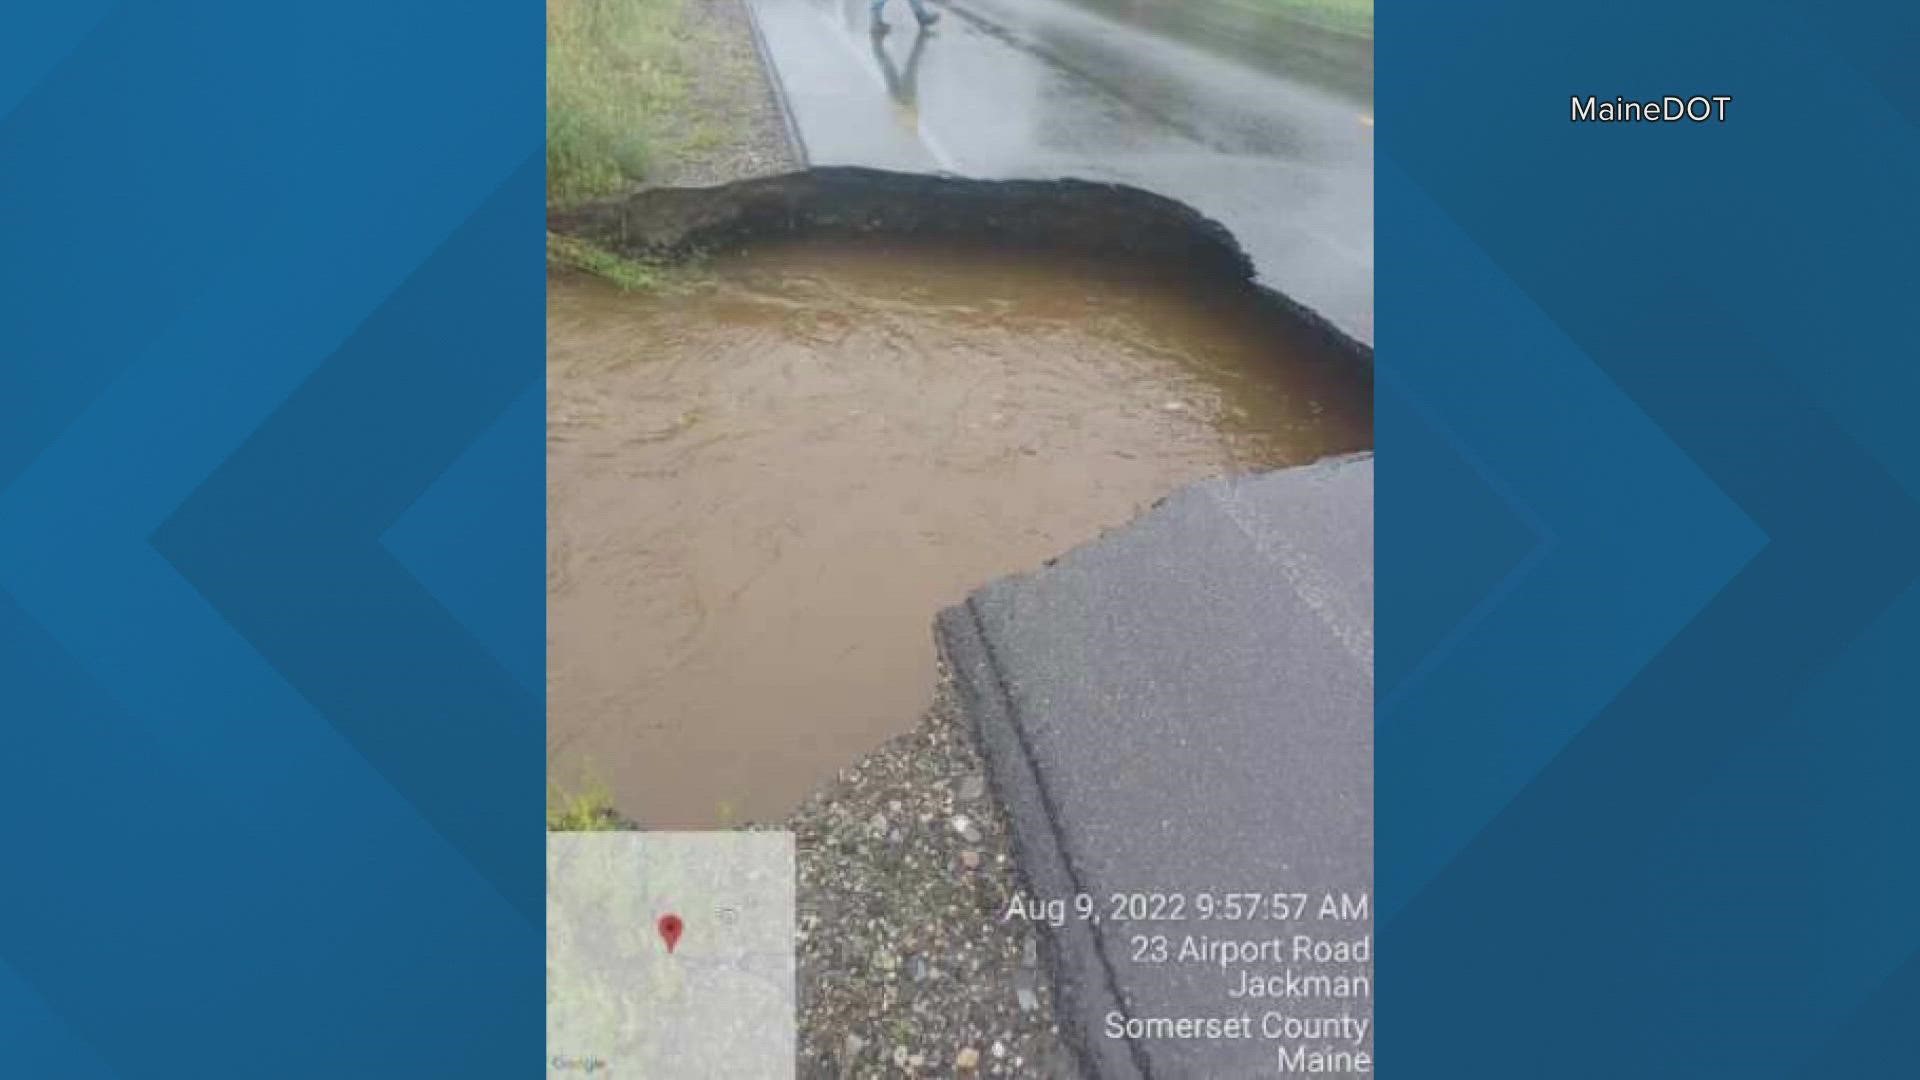 NEWS CENTER Maine meteorologist Jason Nappi said rain, thunderstorms, and a stalled frontal boundary contributed to flooding in the area.